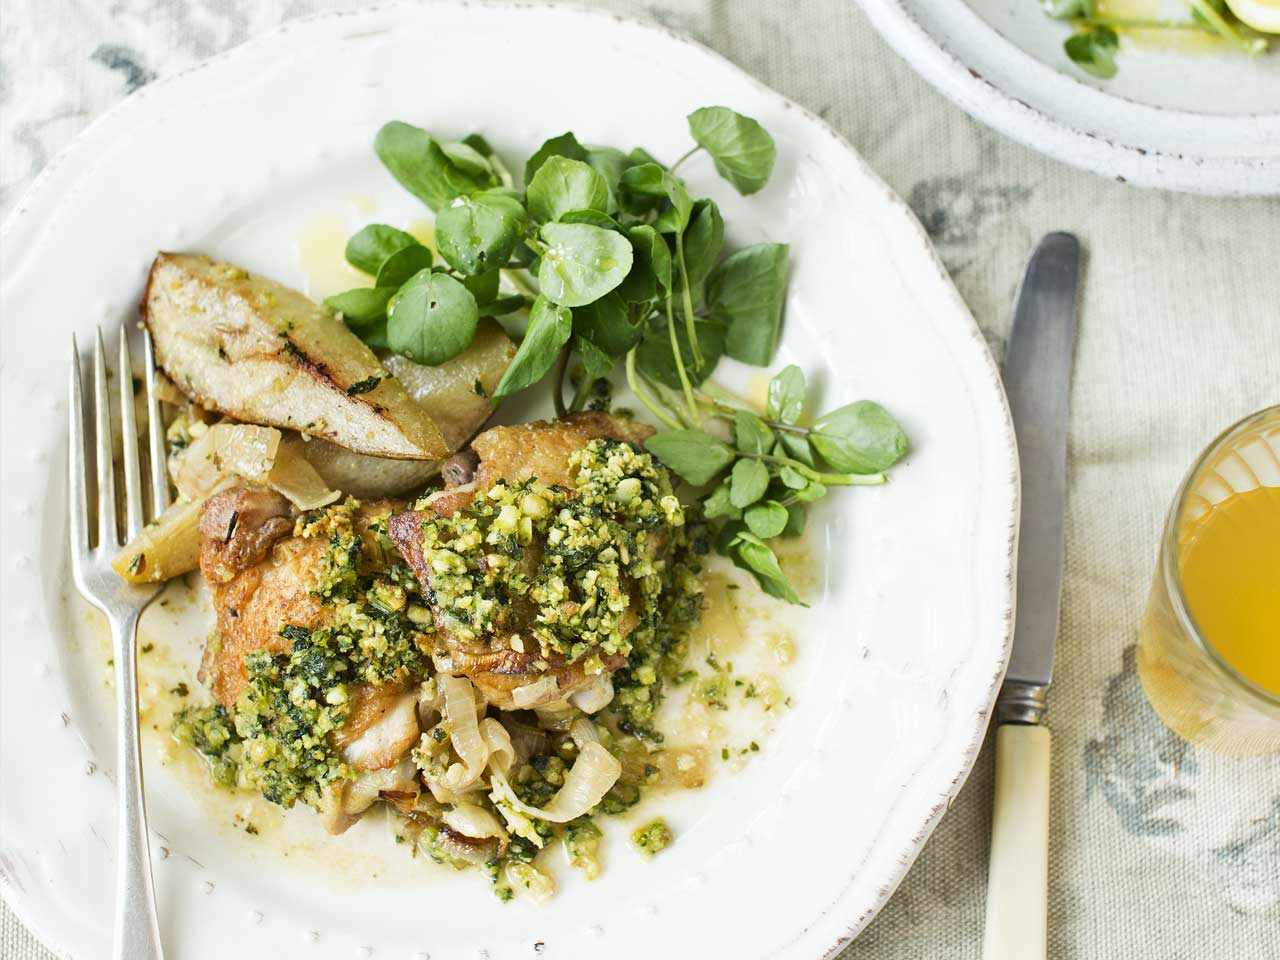 Baked chicken with pears and hazelnuts